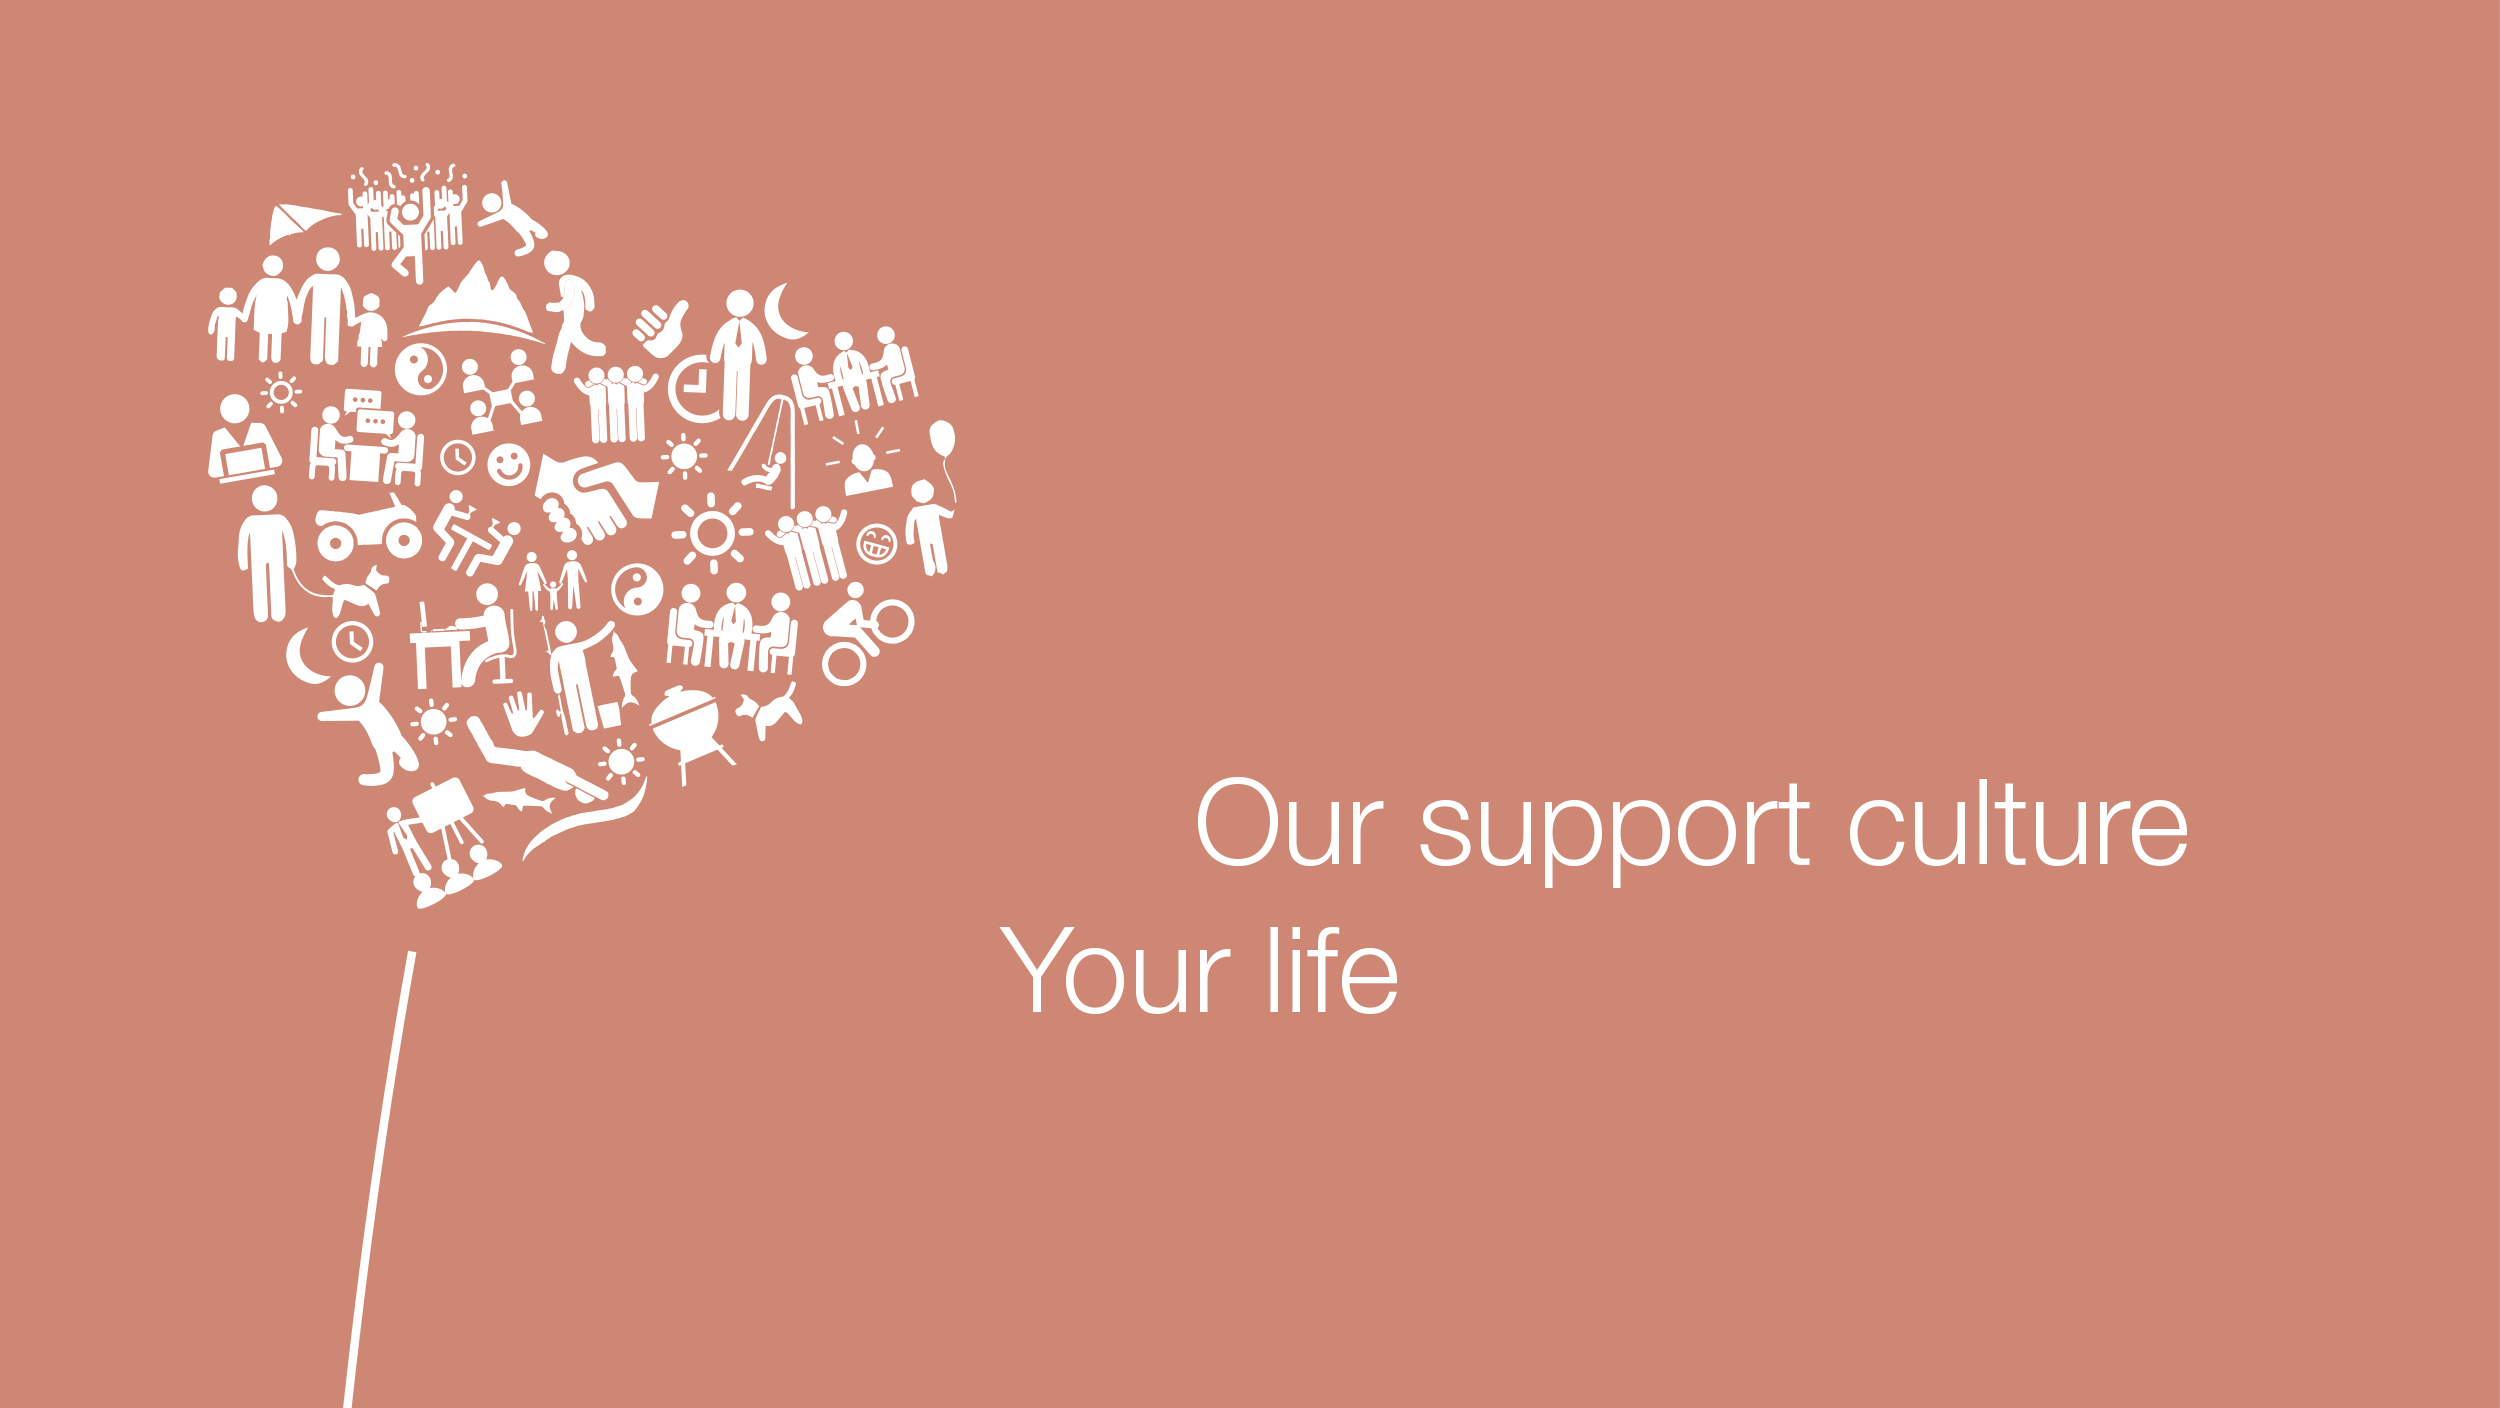 Dandelion heart-shaped icons, beside the slogan: Our support culture Your life